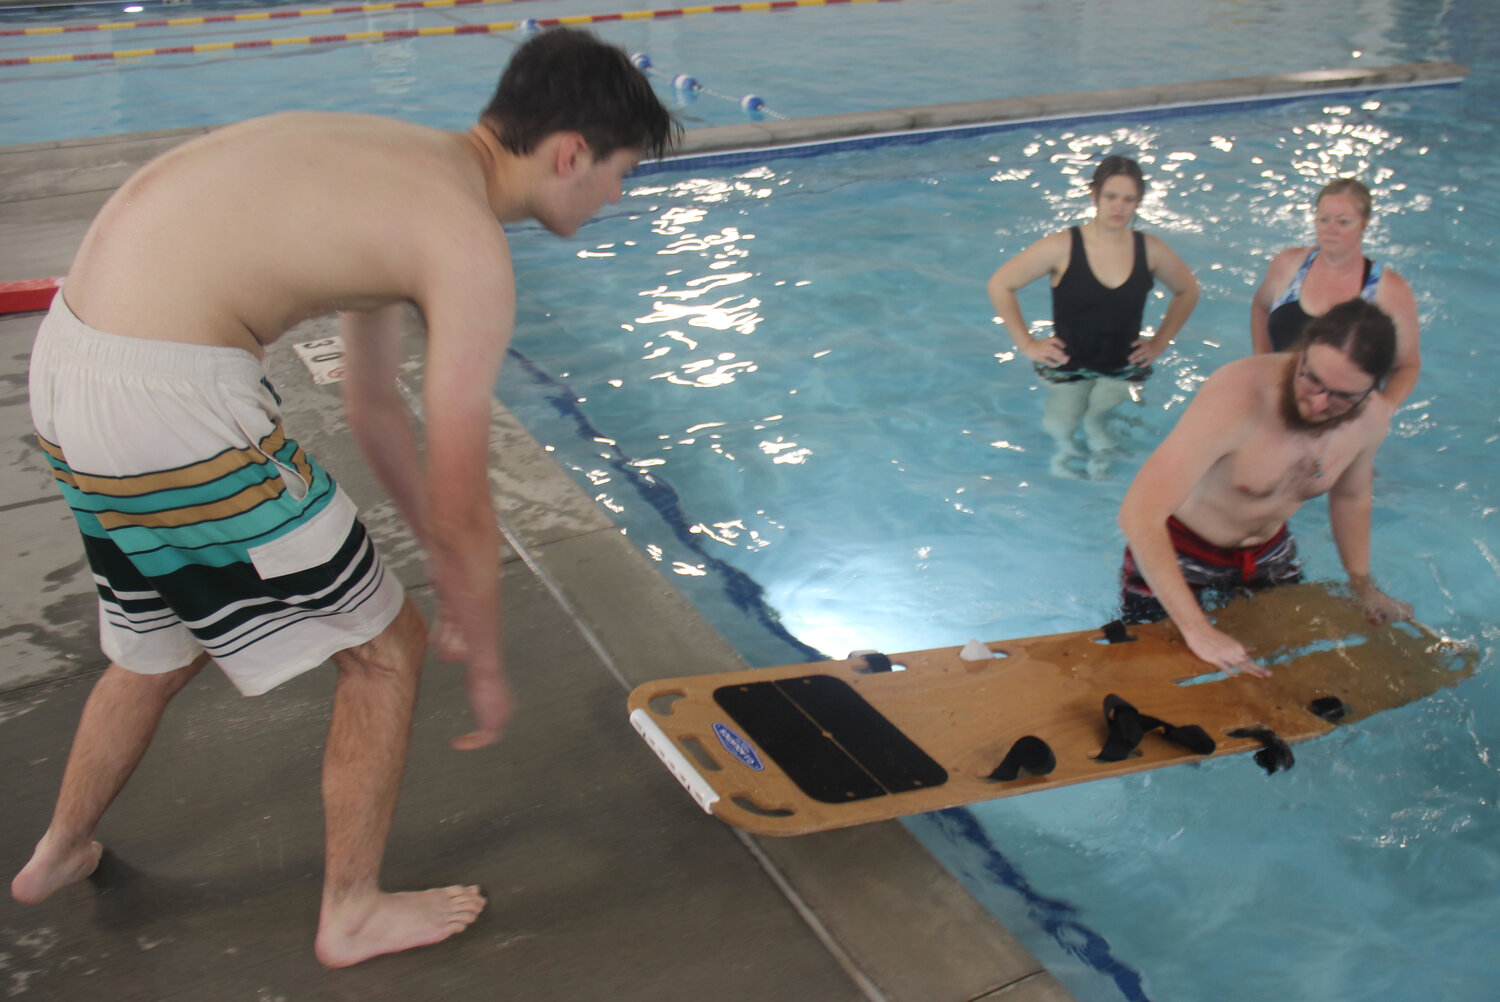 Jacob Nagel works with Cole McBride to handle the backboard during lifeguard training while Miakoda Rhodes and Tamara Wurth look on.